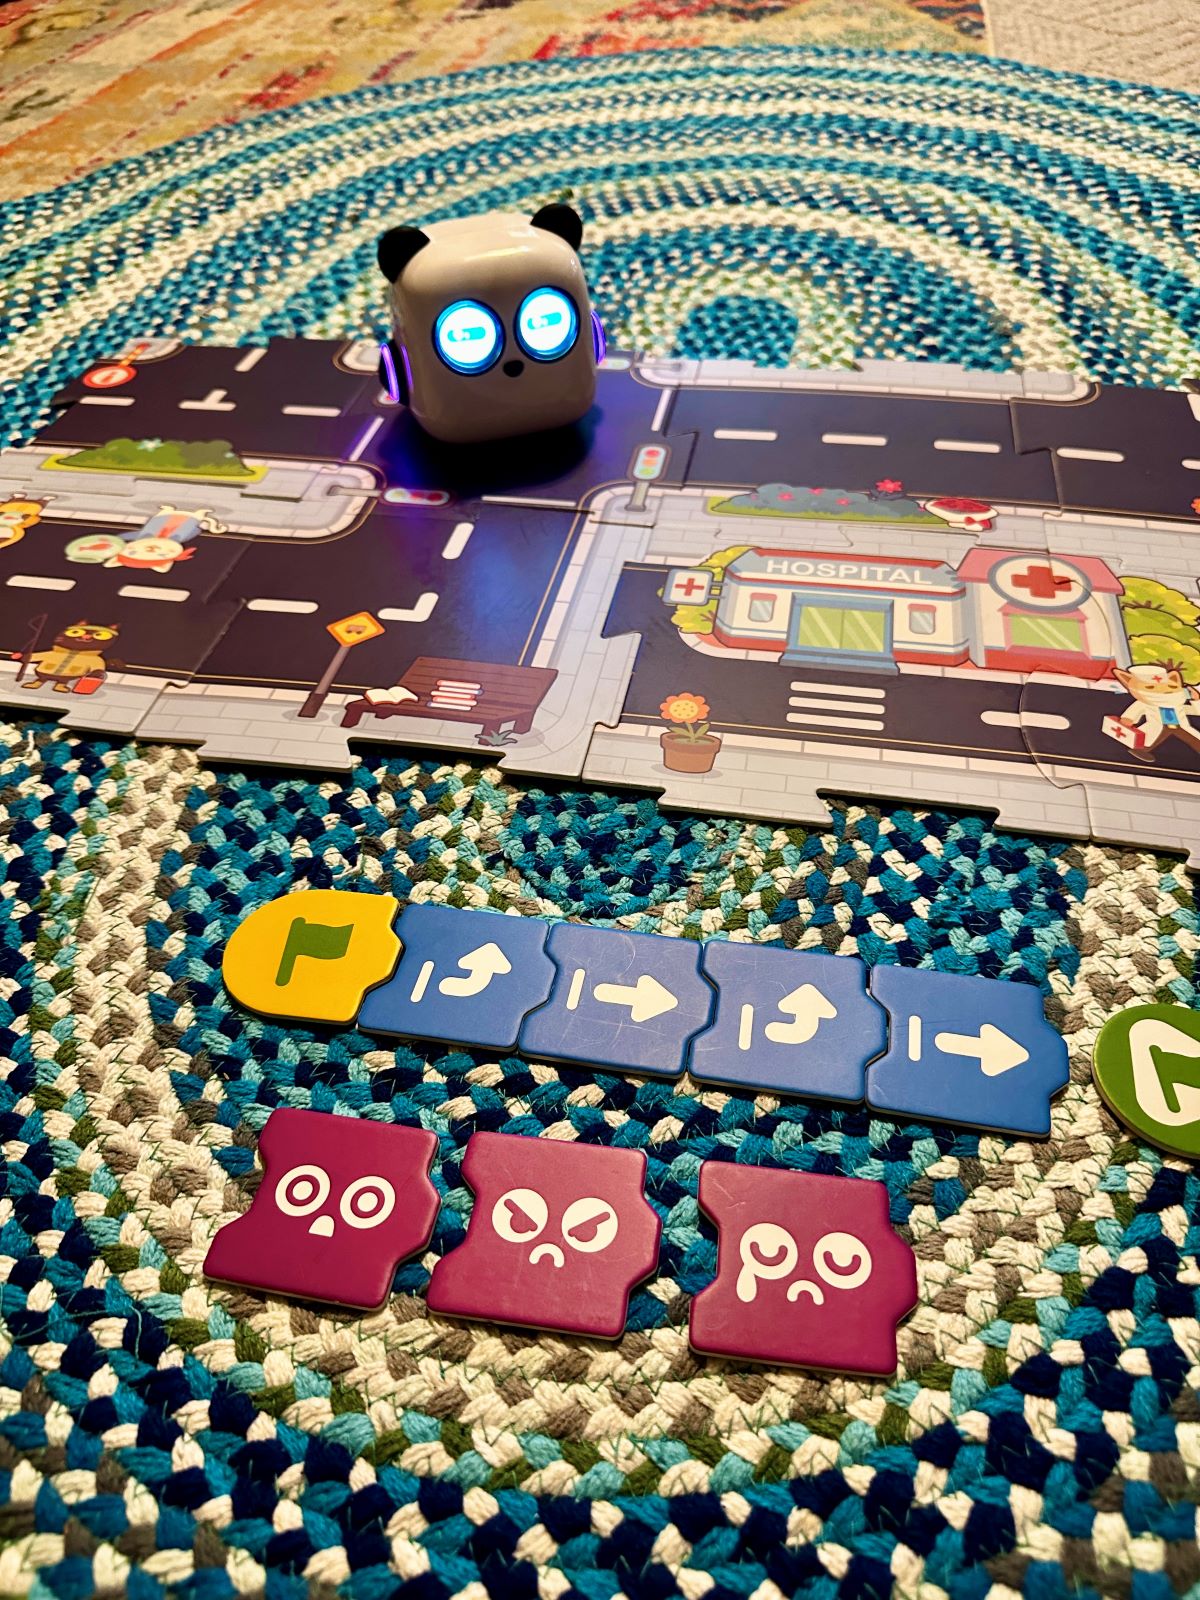 The mTiny robot toy set up with different emotion card options.